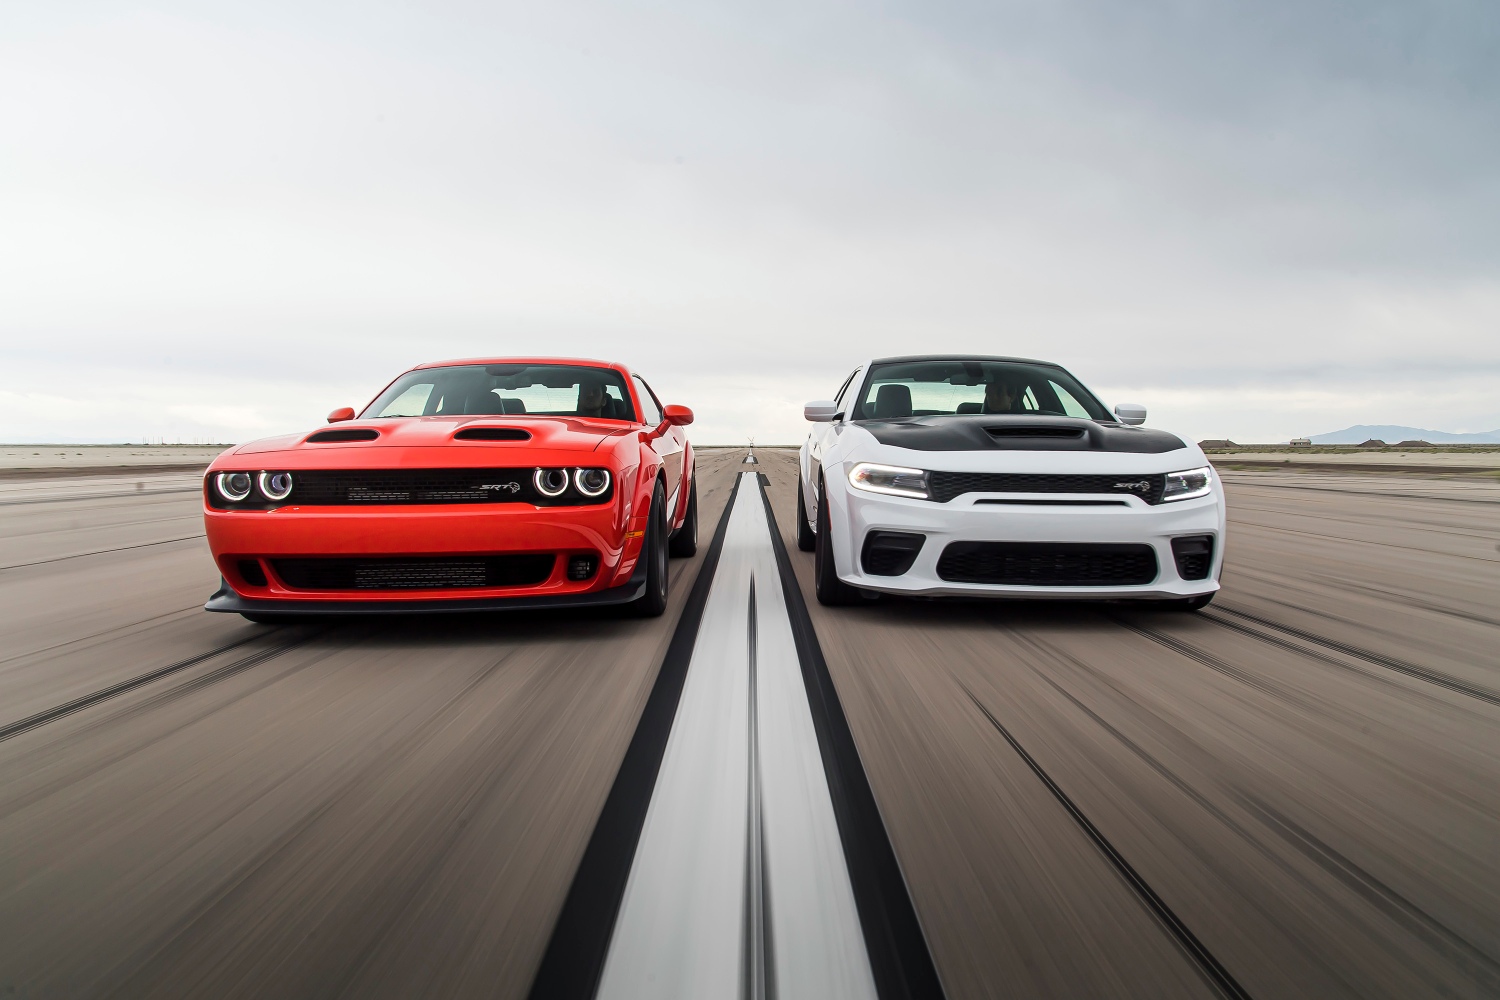 The Dodge Charger and Dodge Challenger are done